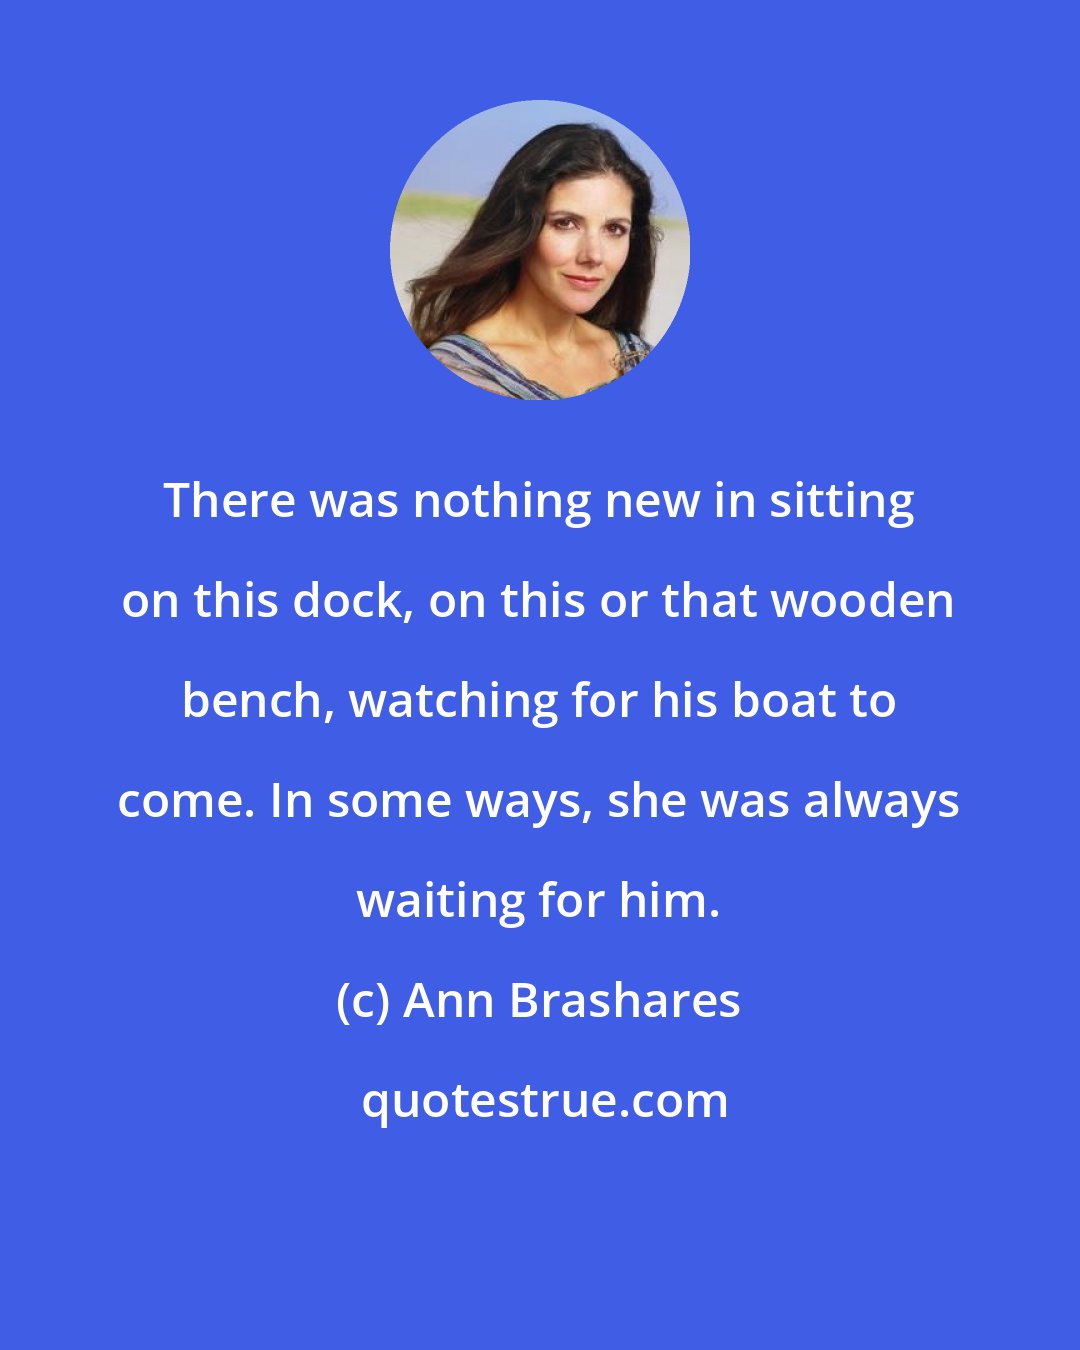 Ann Brashares: There was nothing new in sitting on this dock, on this or that wooden bench, watching for his boat to come. In some ways, she was always waiting for him.